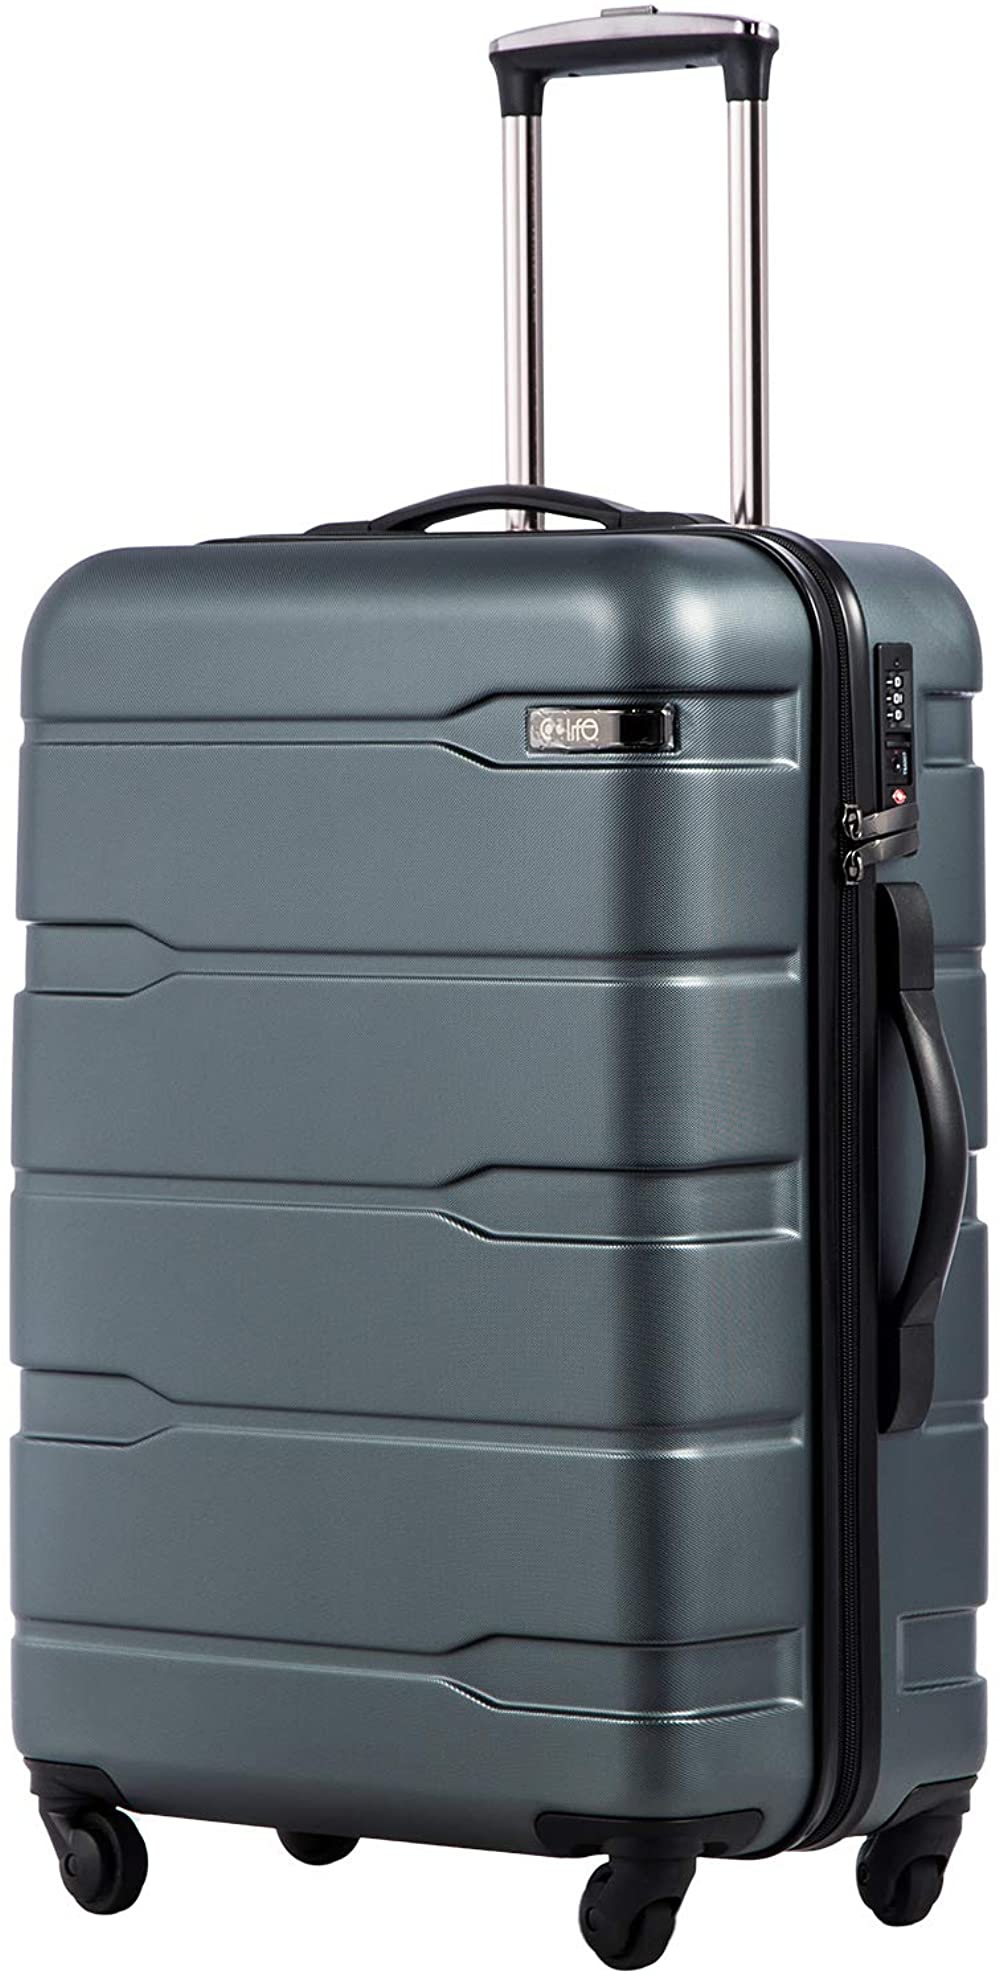 best-international-carry-on-luggage